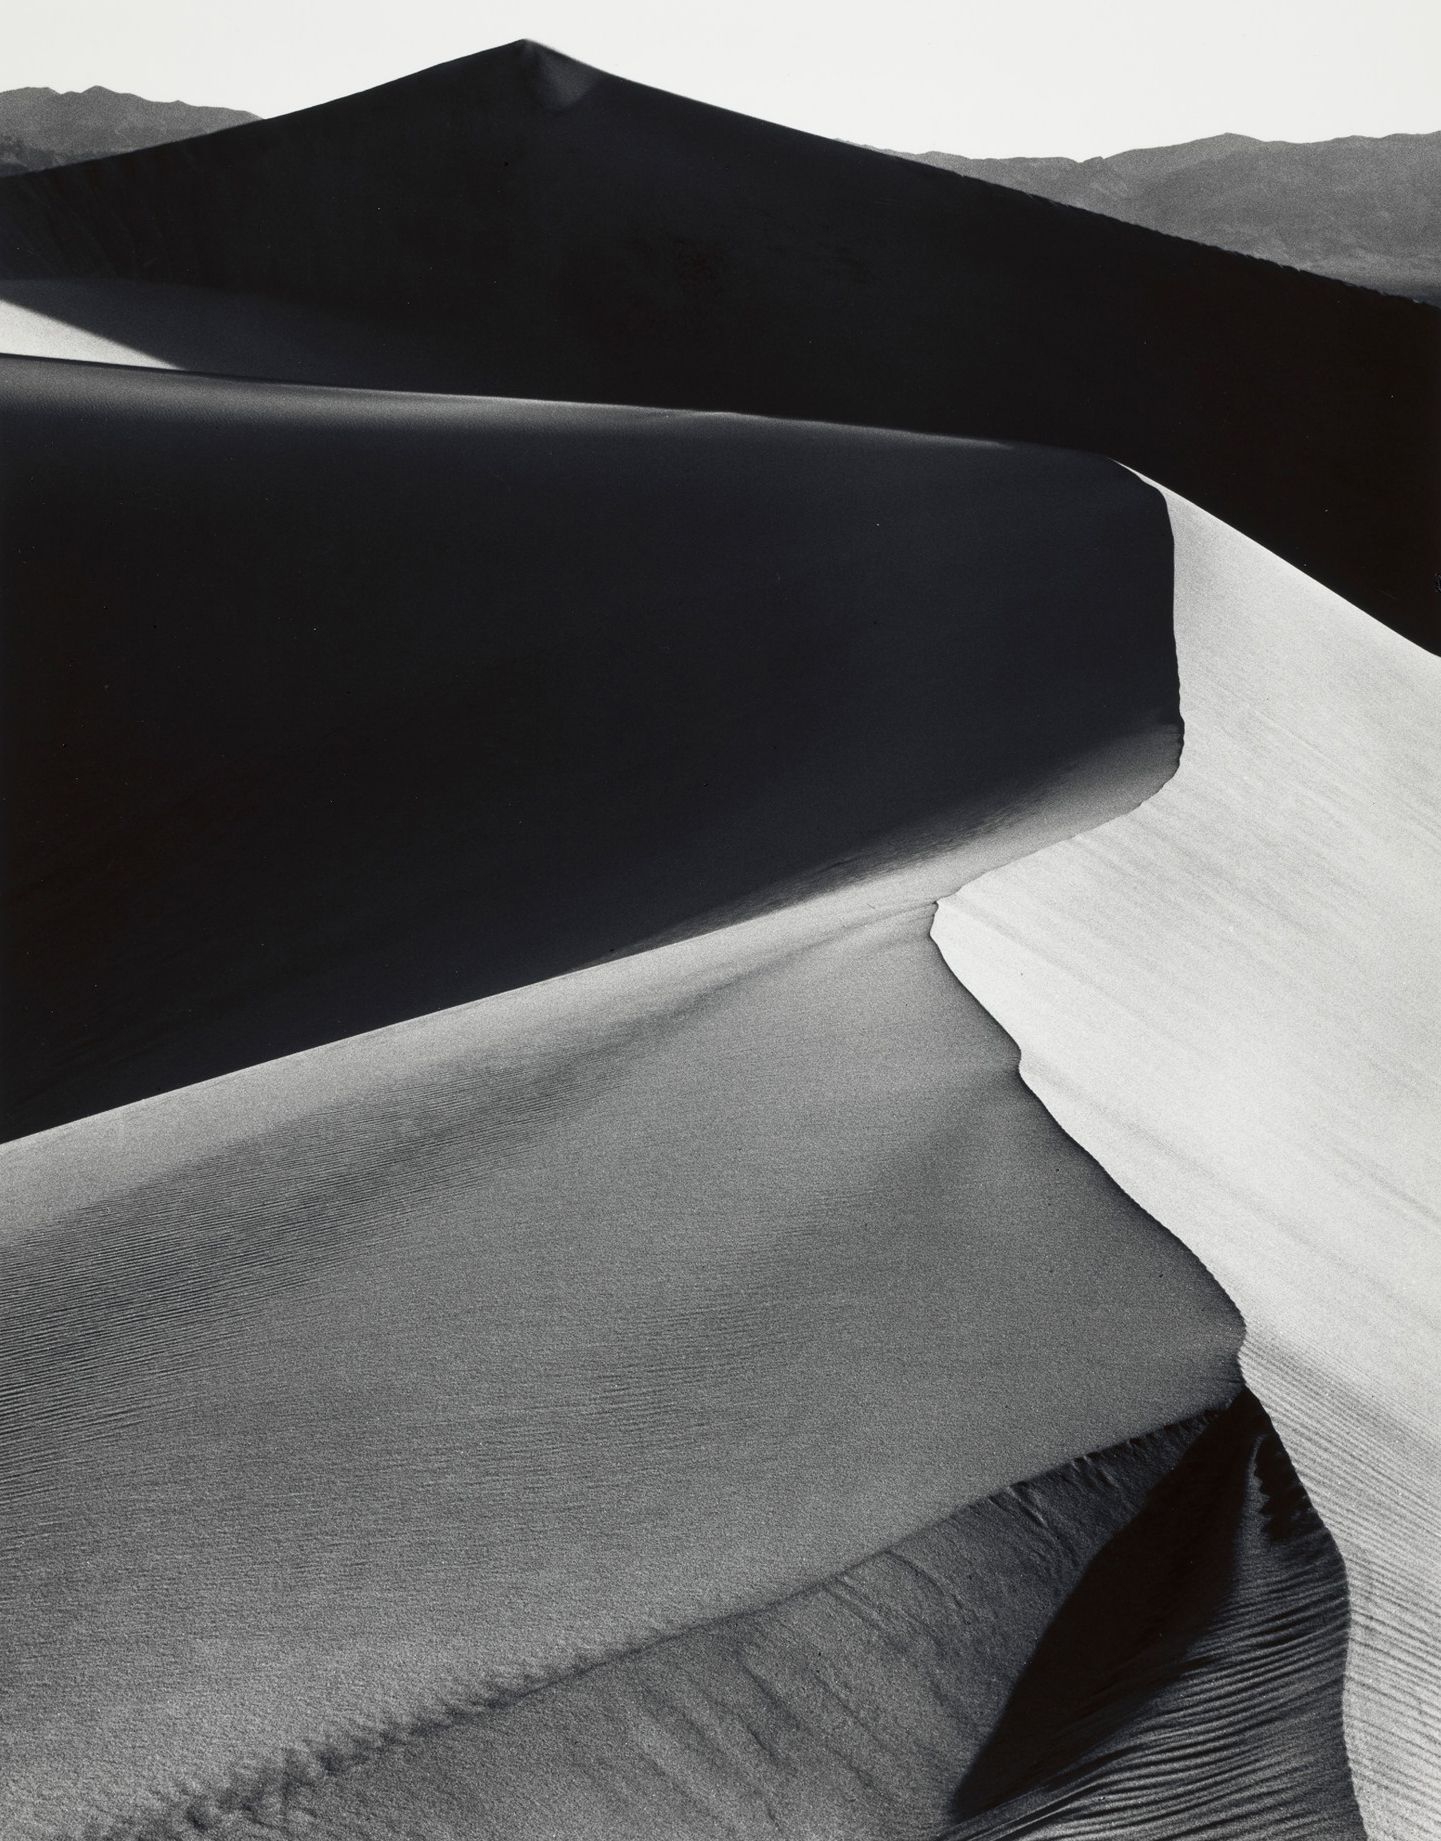 Ansel Adams: Compositions in Nature